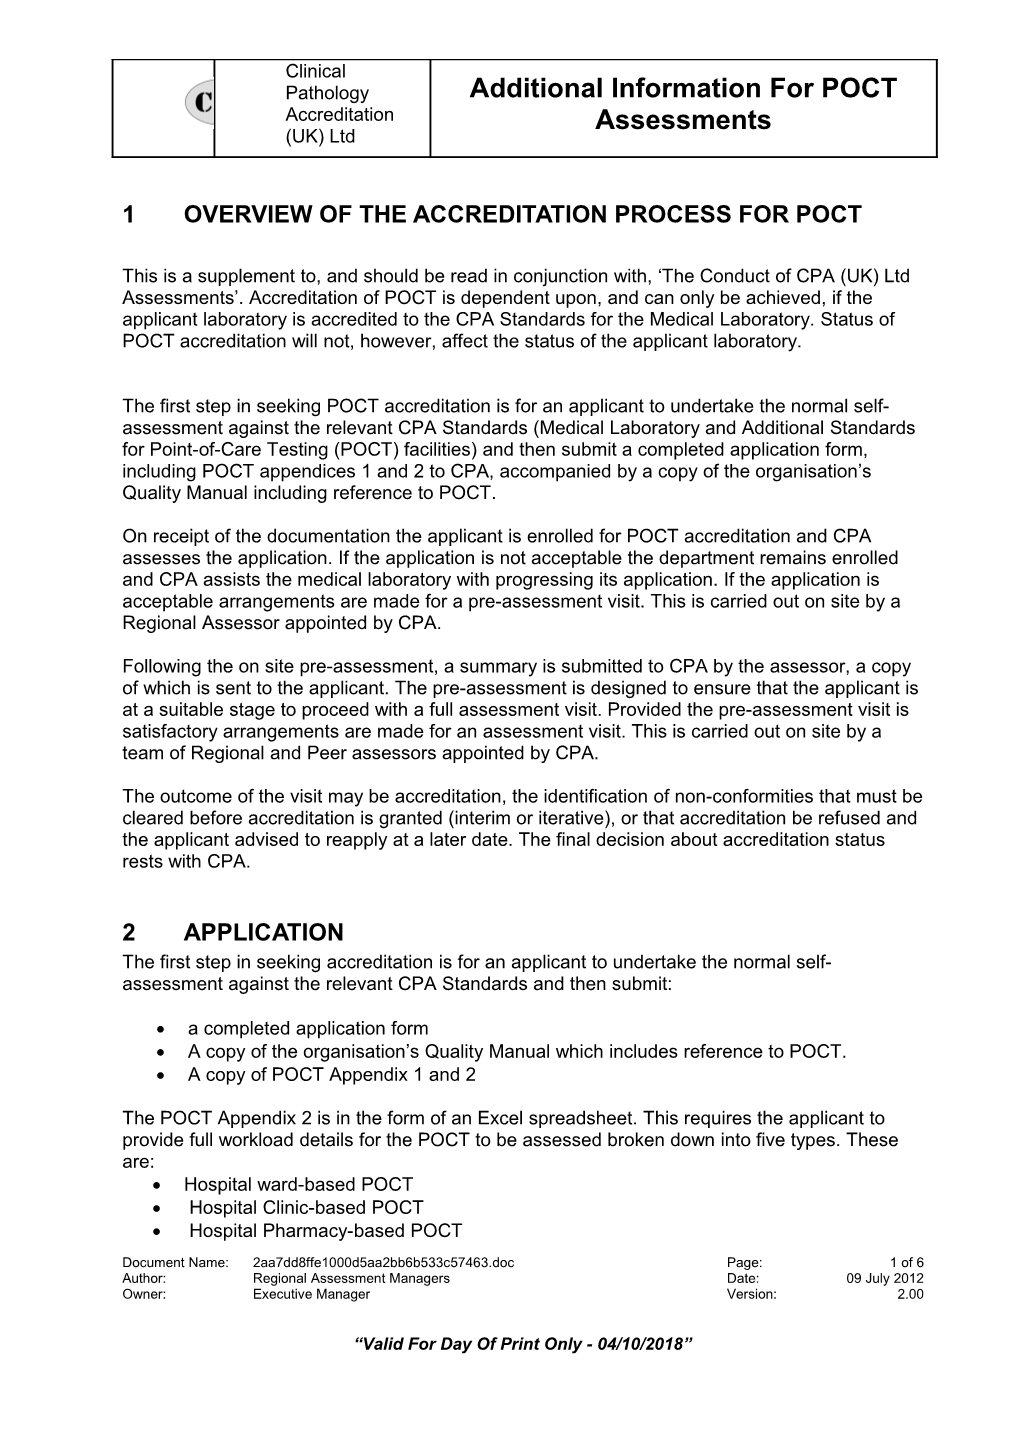 1Overview of the Accreditation Process for Poct